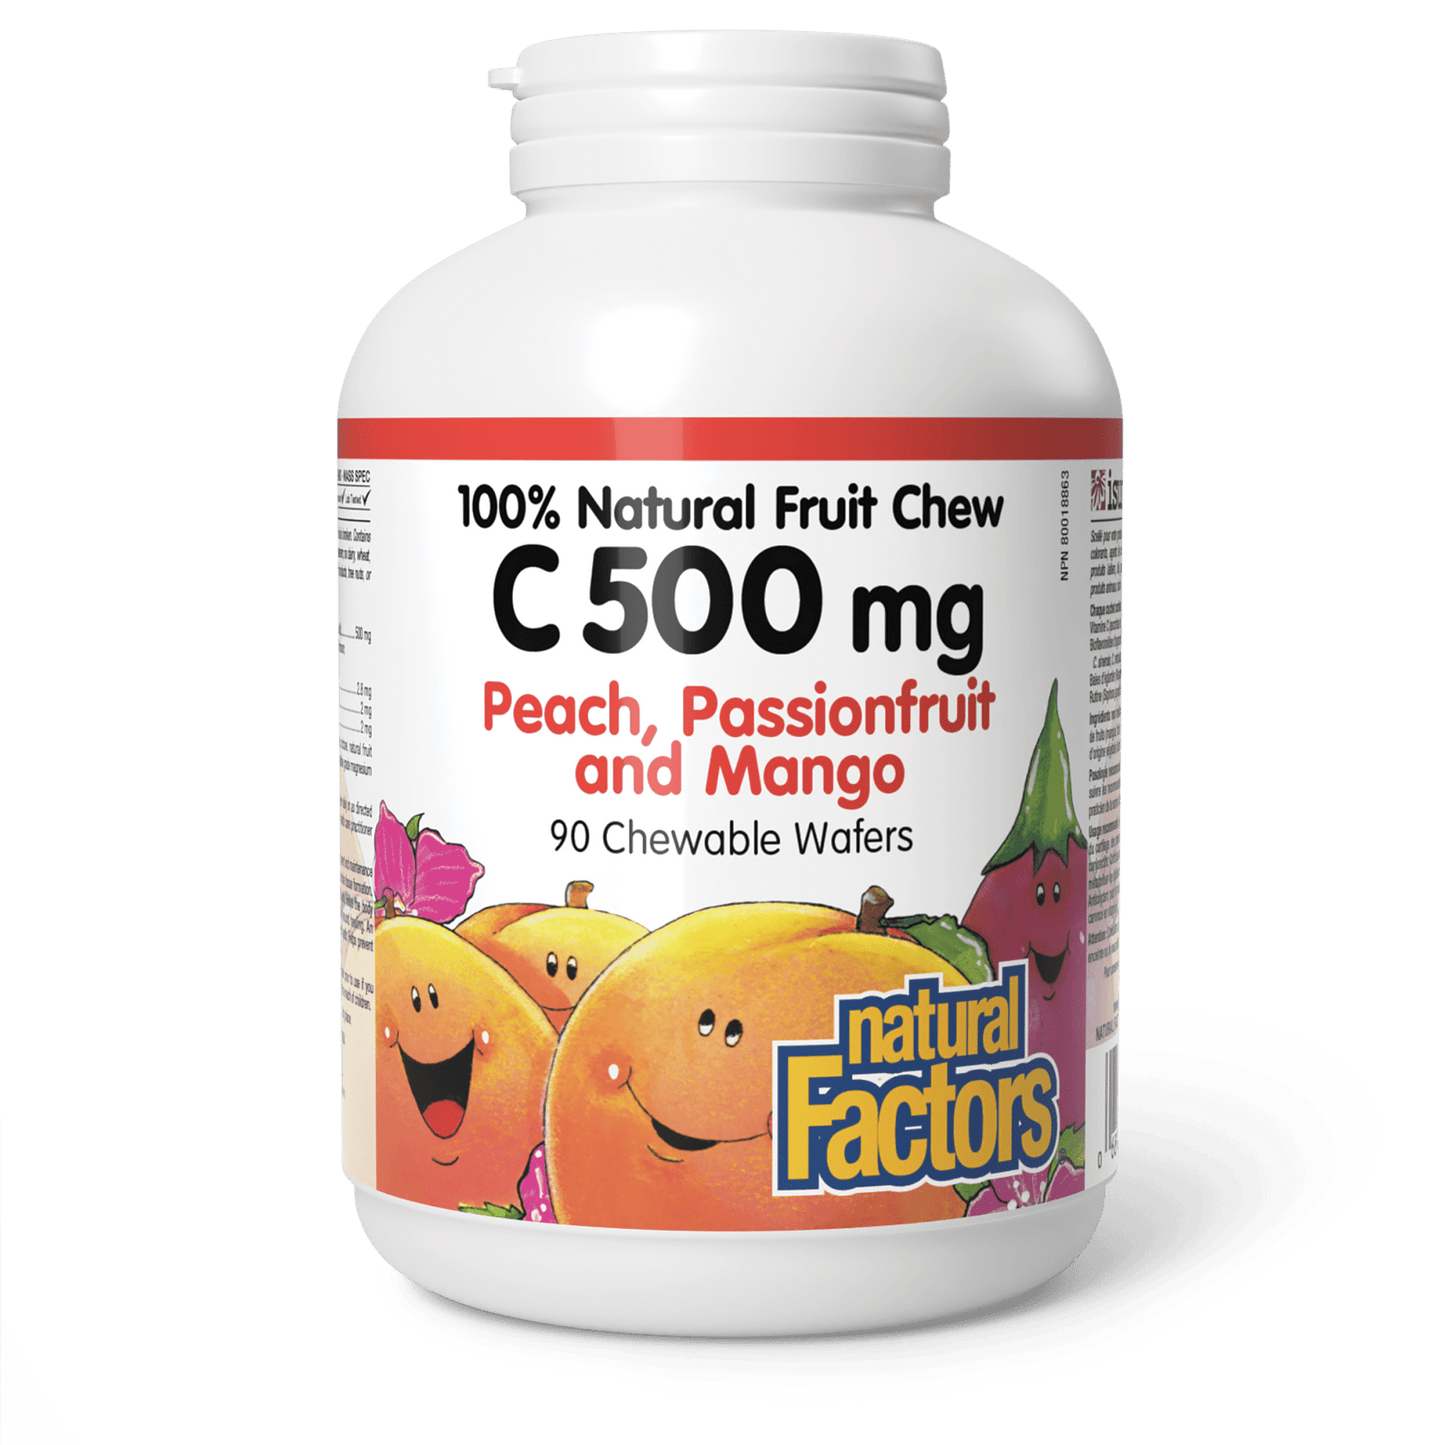 C 500 mg 100% Natural Fruit Chew, Peach, Passionfruit, and Mango, Natural Factors|v|image|1324